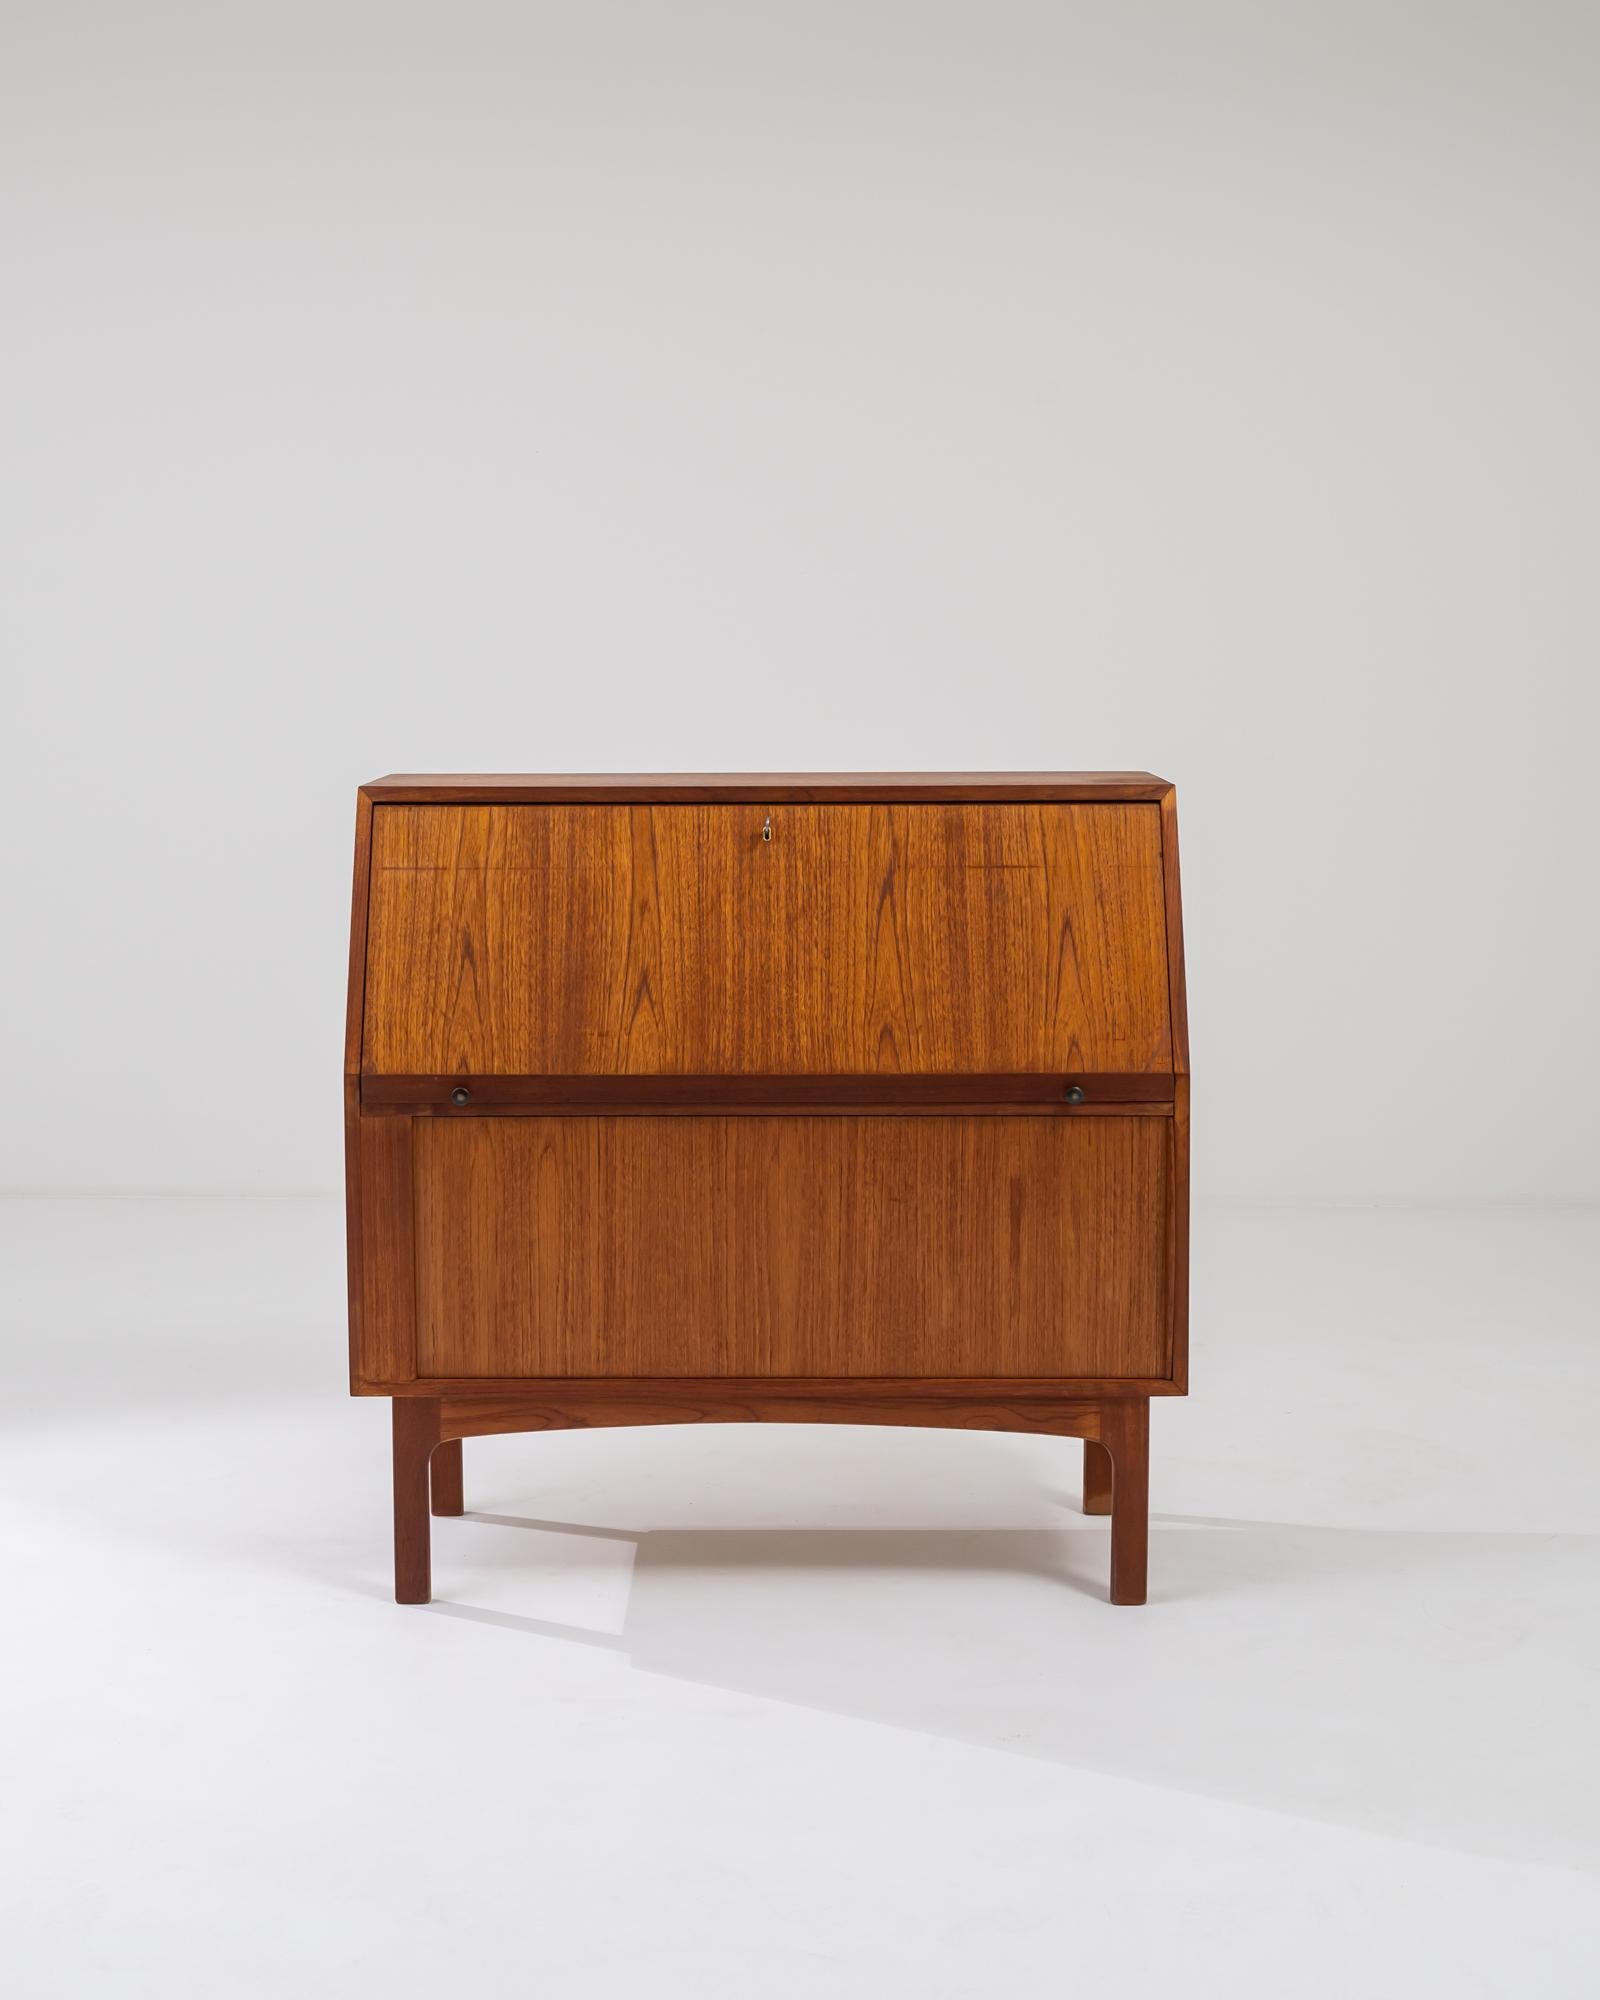 A wooden writing desk made in 1960s Denmark. Geometrically crafted from teak, this sharp writing desk ticks all the boxes of mid-century Danish design excellence. Its front face swings down to reveal a writing surface, several compartments, and four